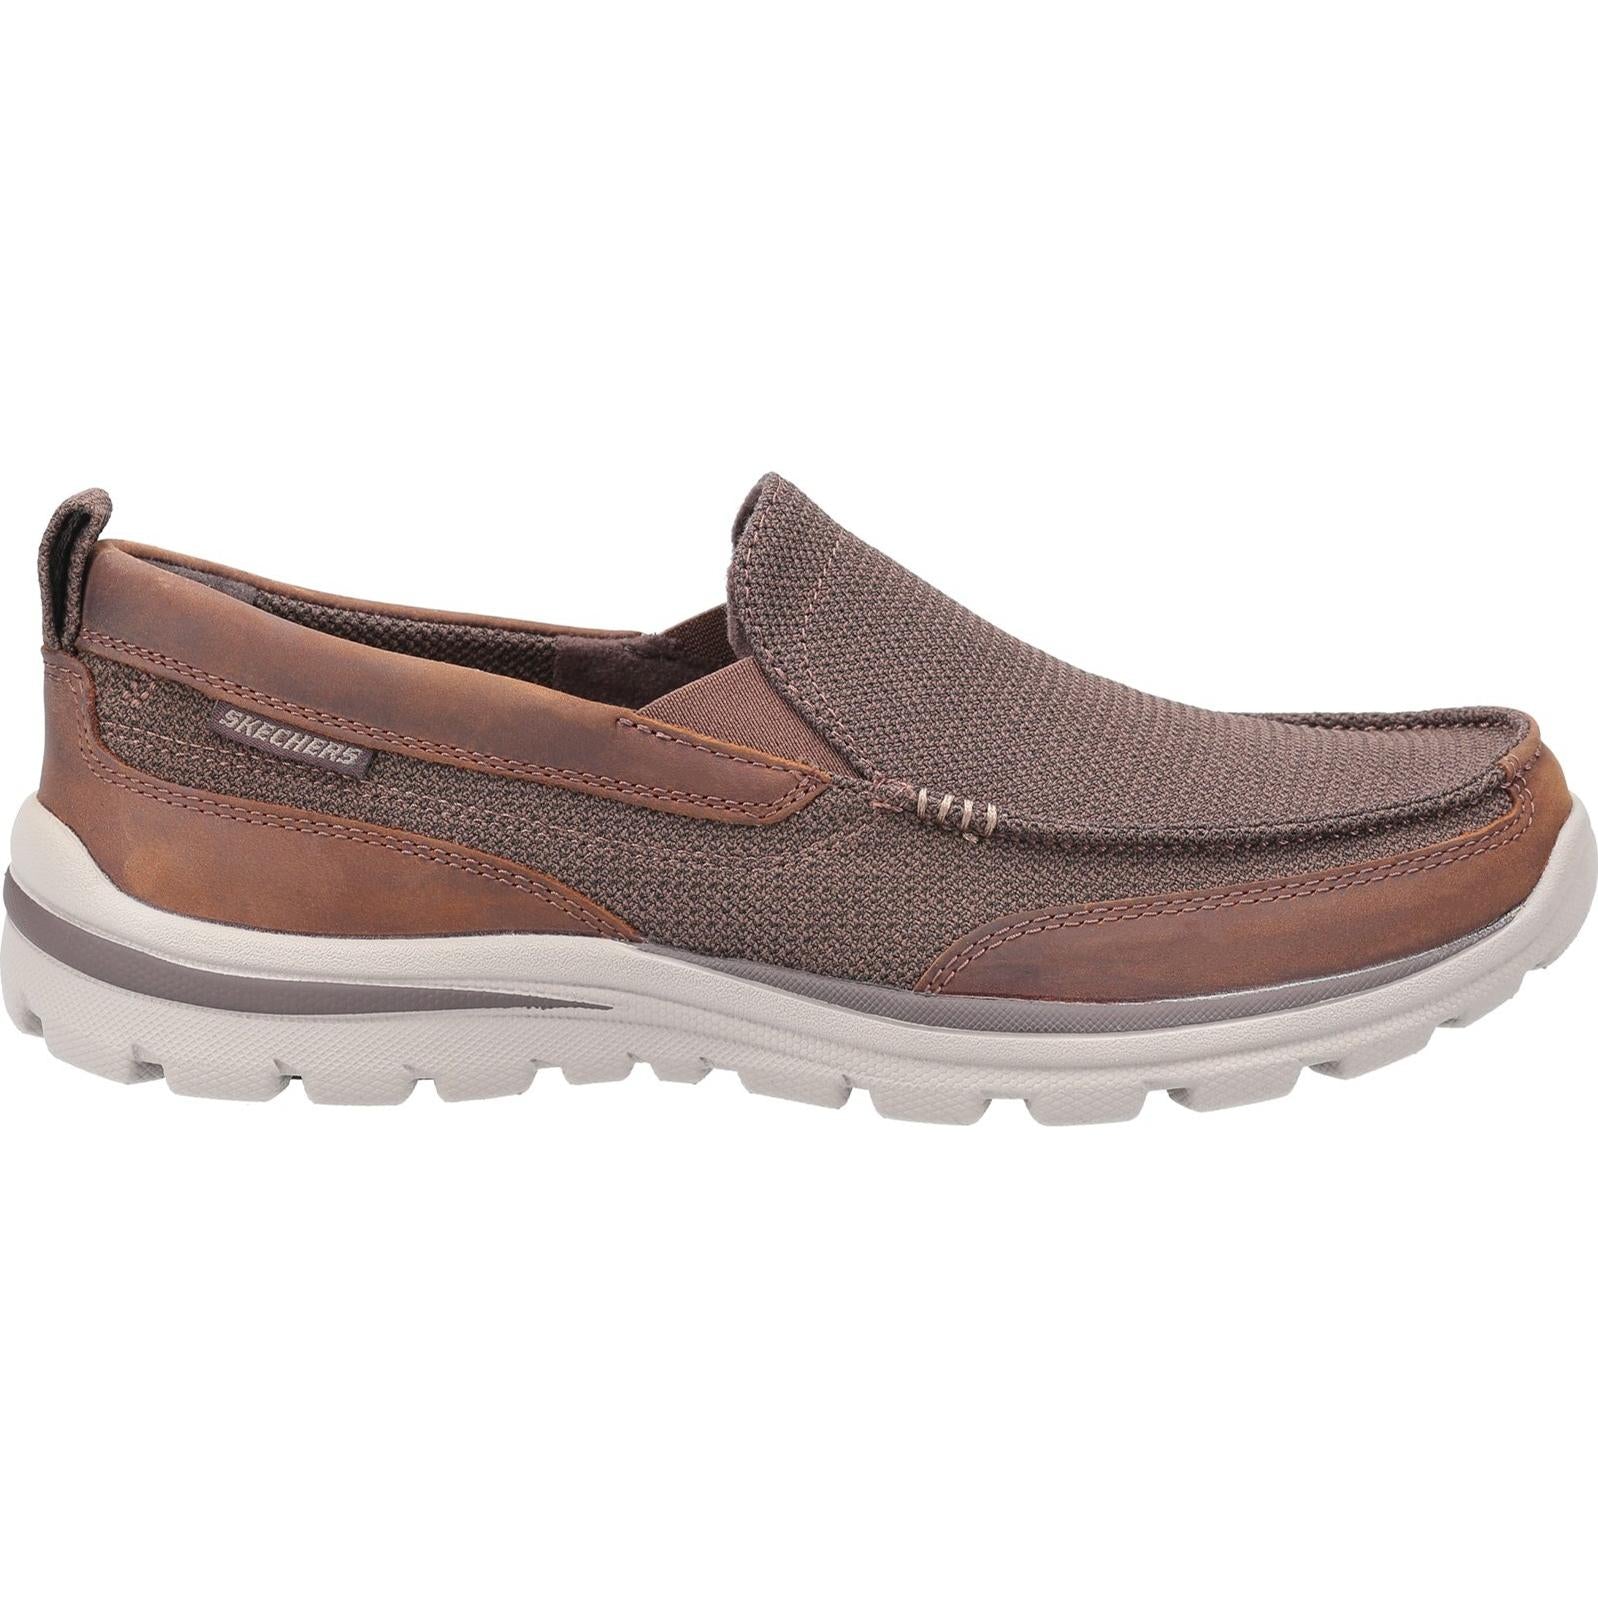 Skechers Superior Milford Shoes